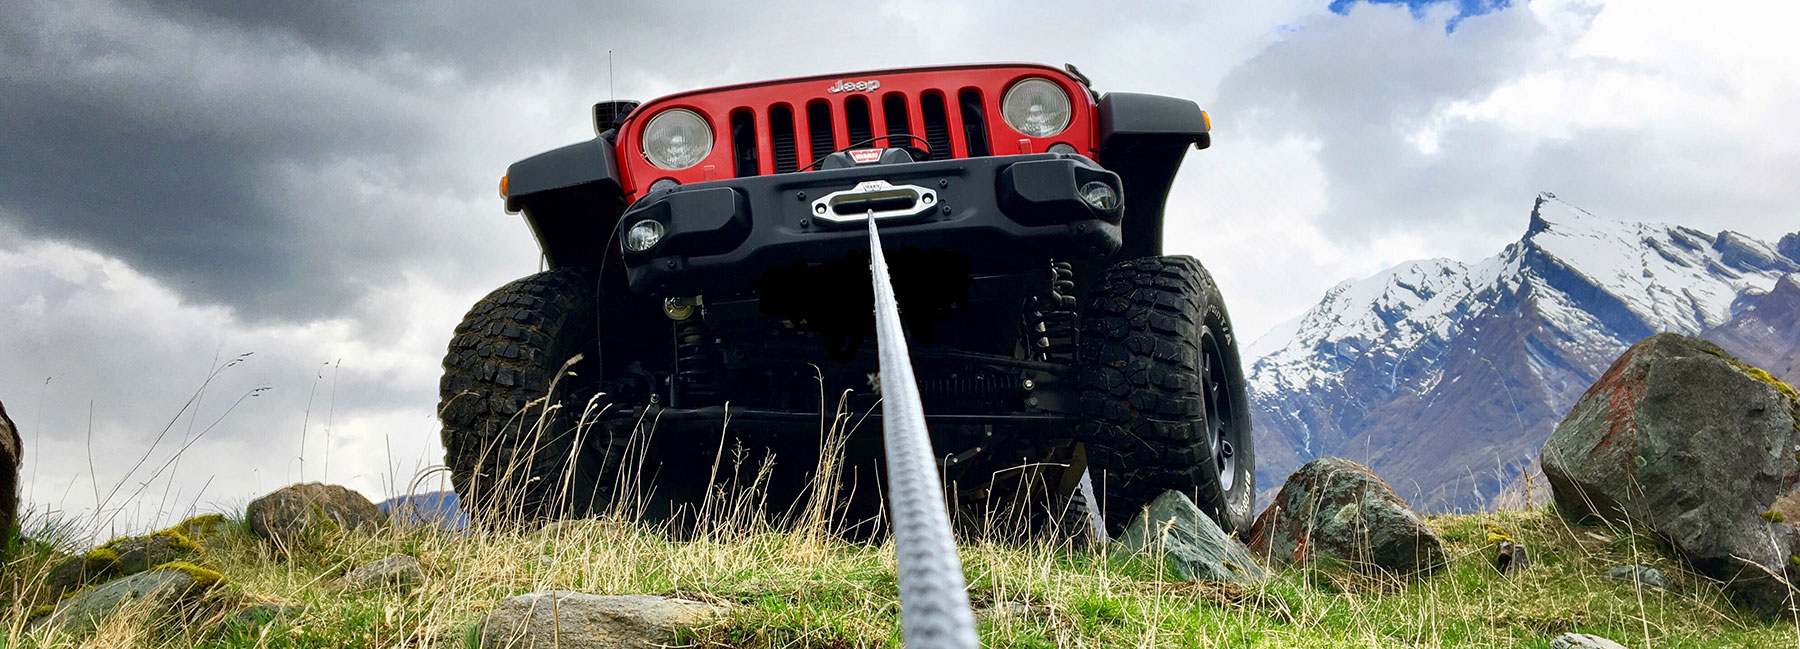 jeep with winch